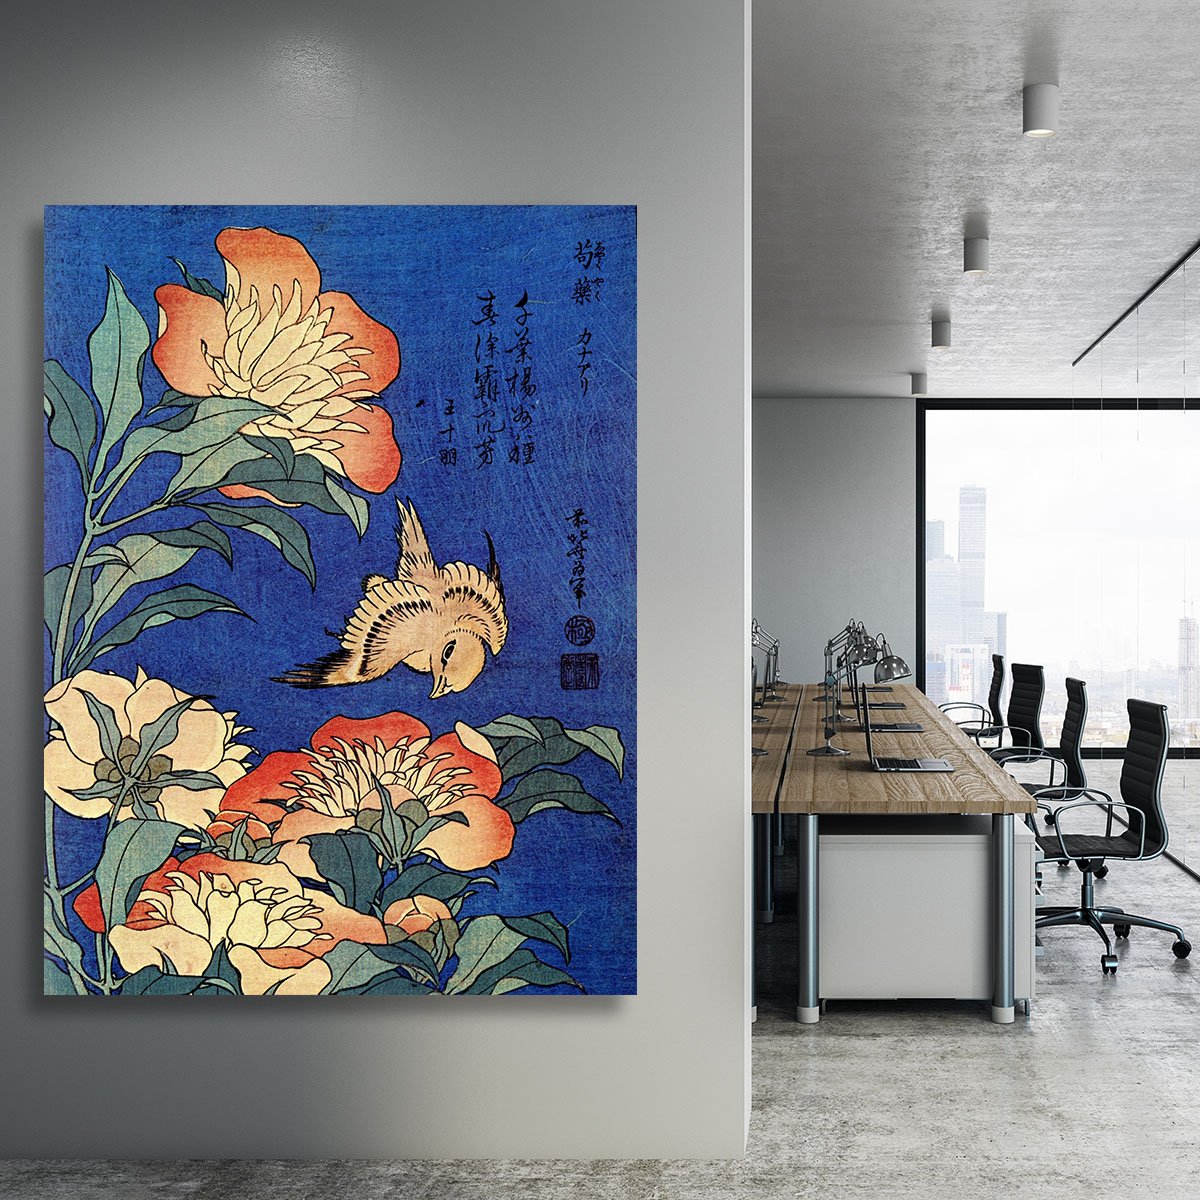 Flowers by Hokusai Canvas Print or Poster